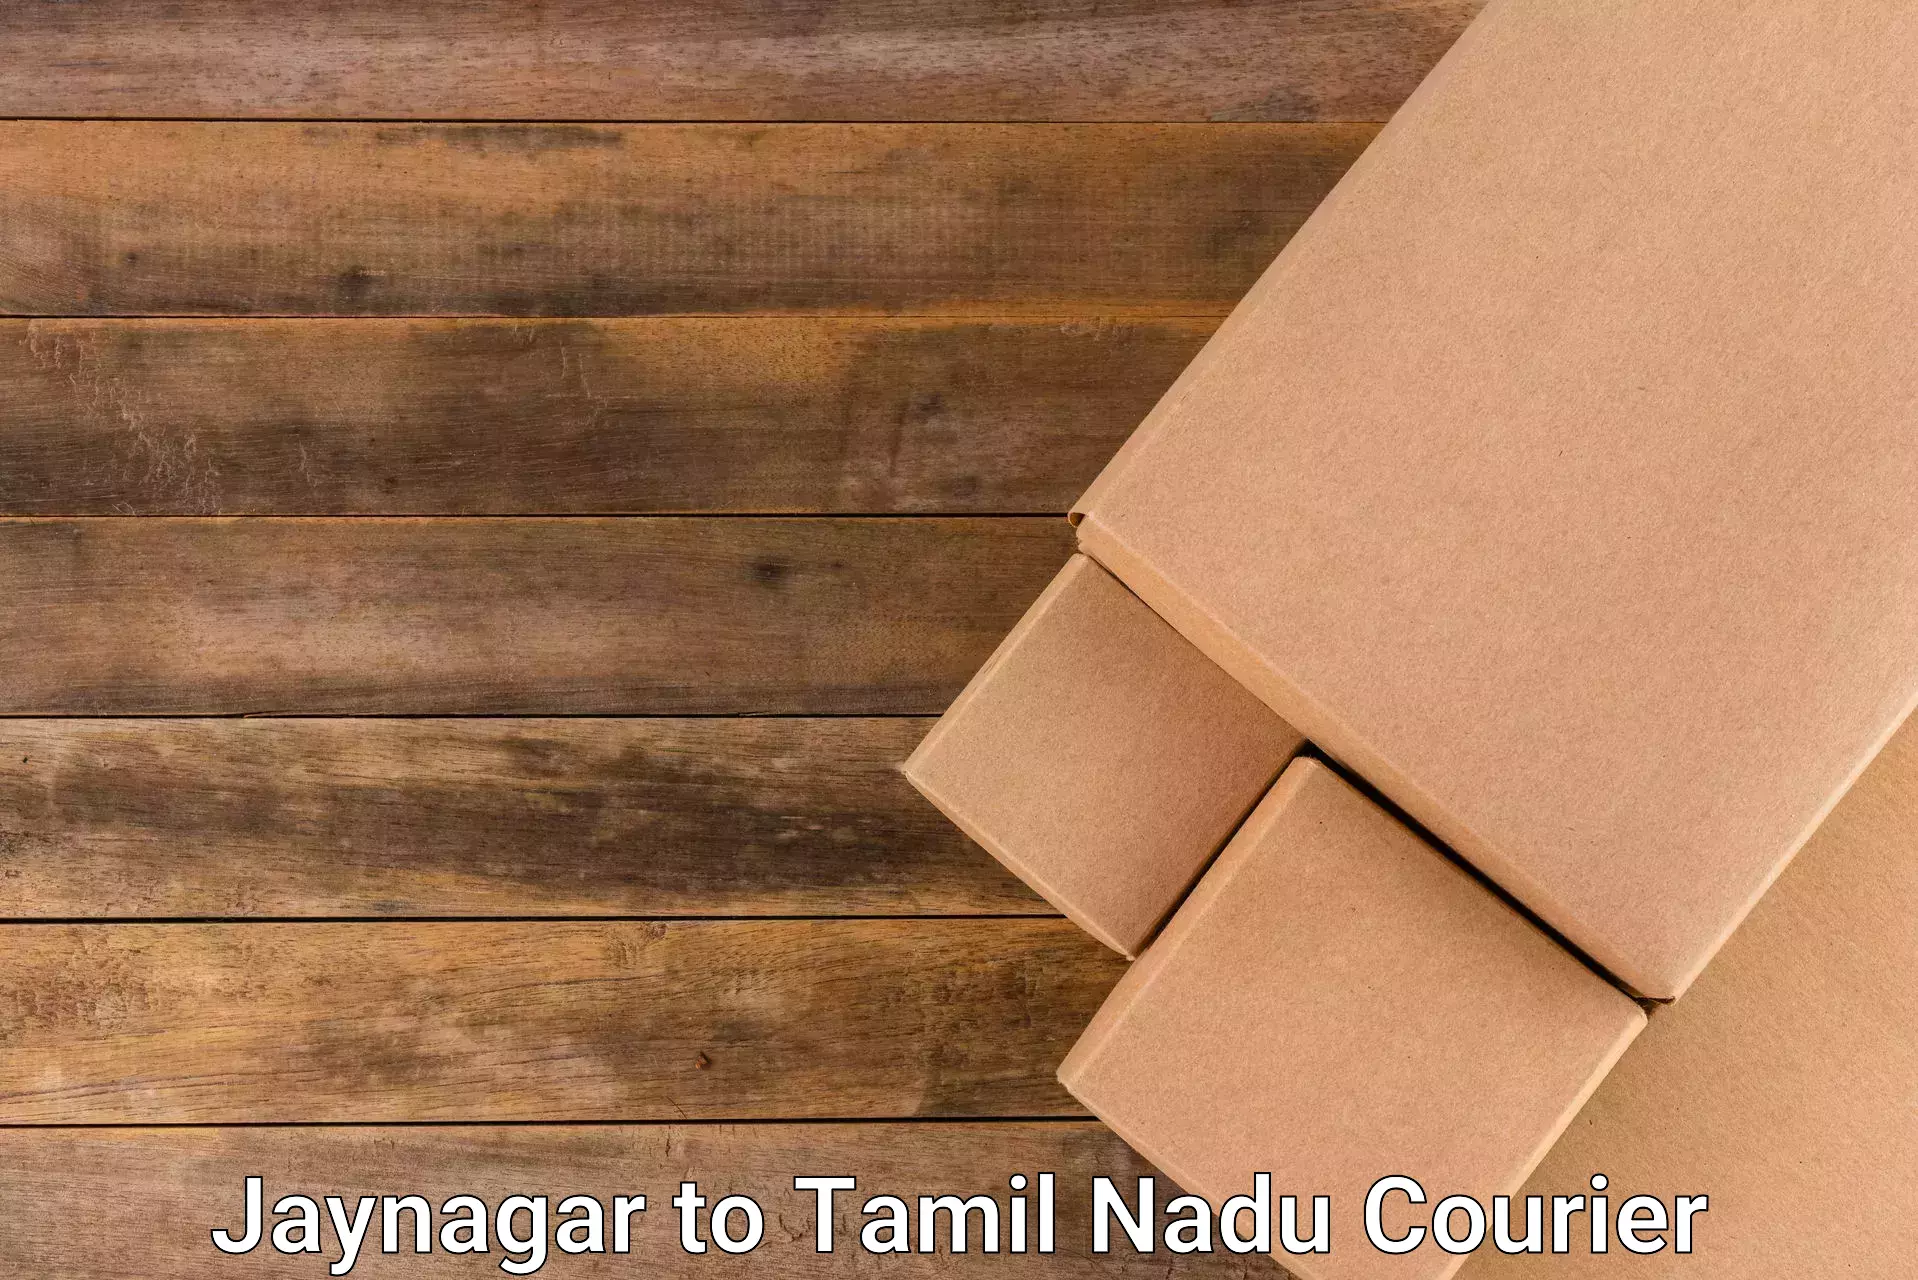 Overnight delivery services Jaynagar to Thondi